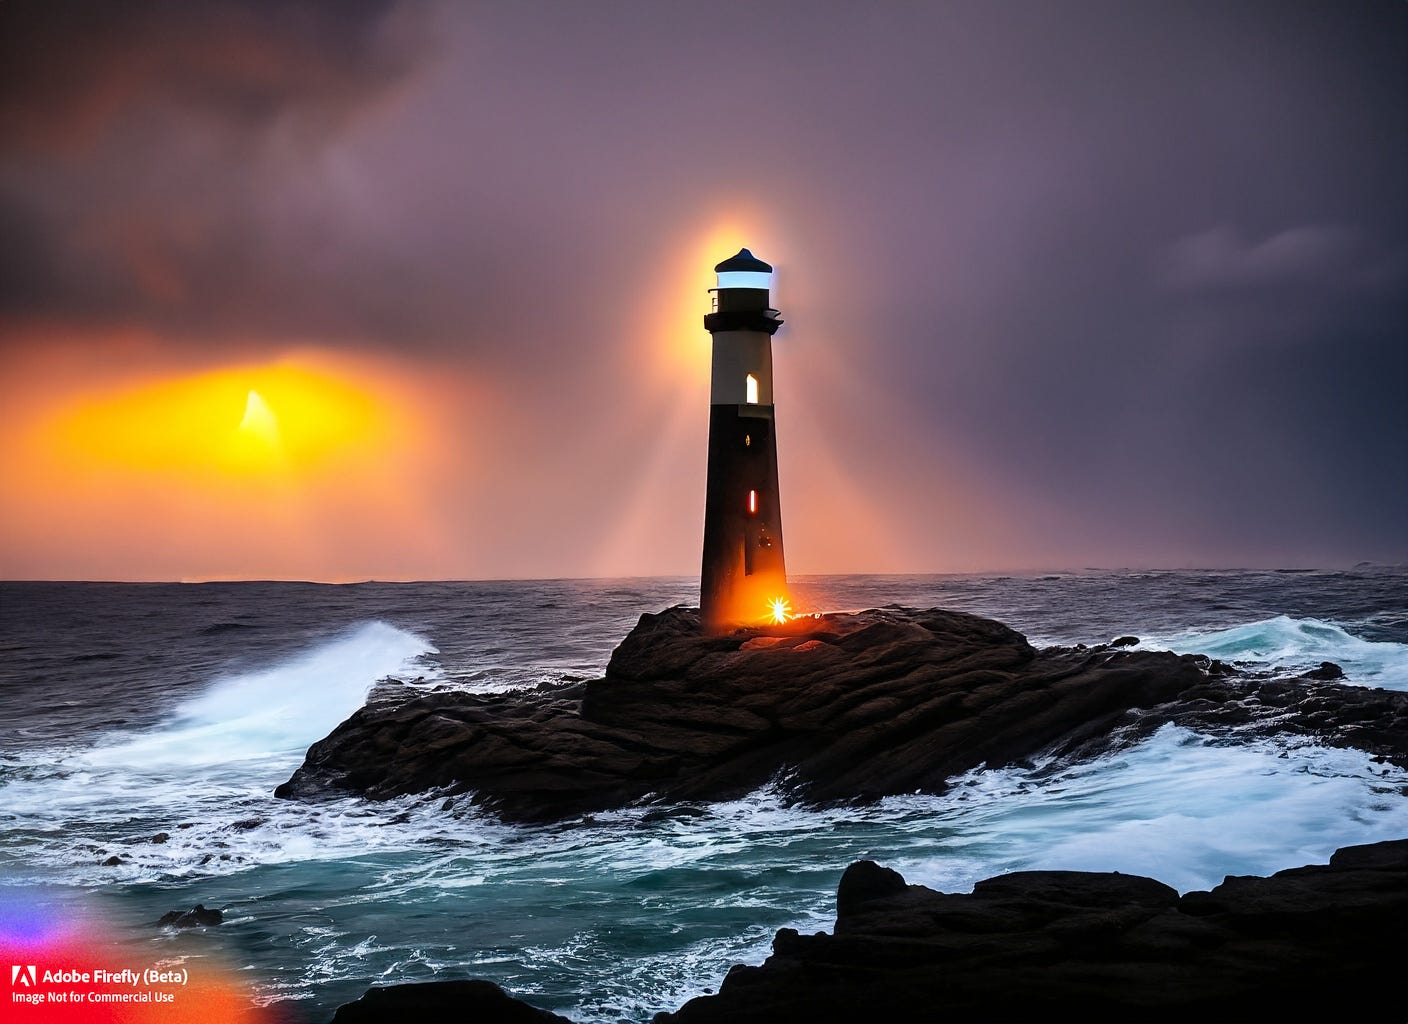 The Lighthouse in the Storm - Image by Author using Adobe Firefly Beta